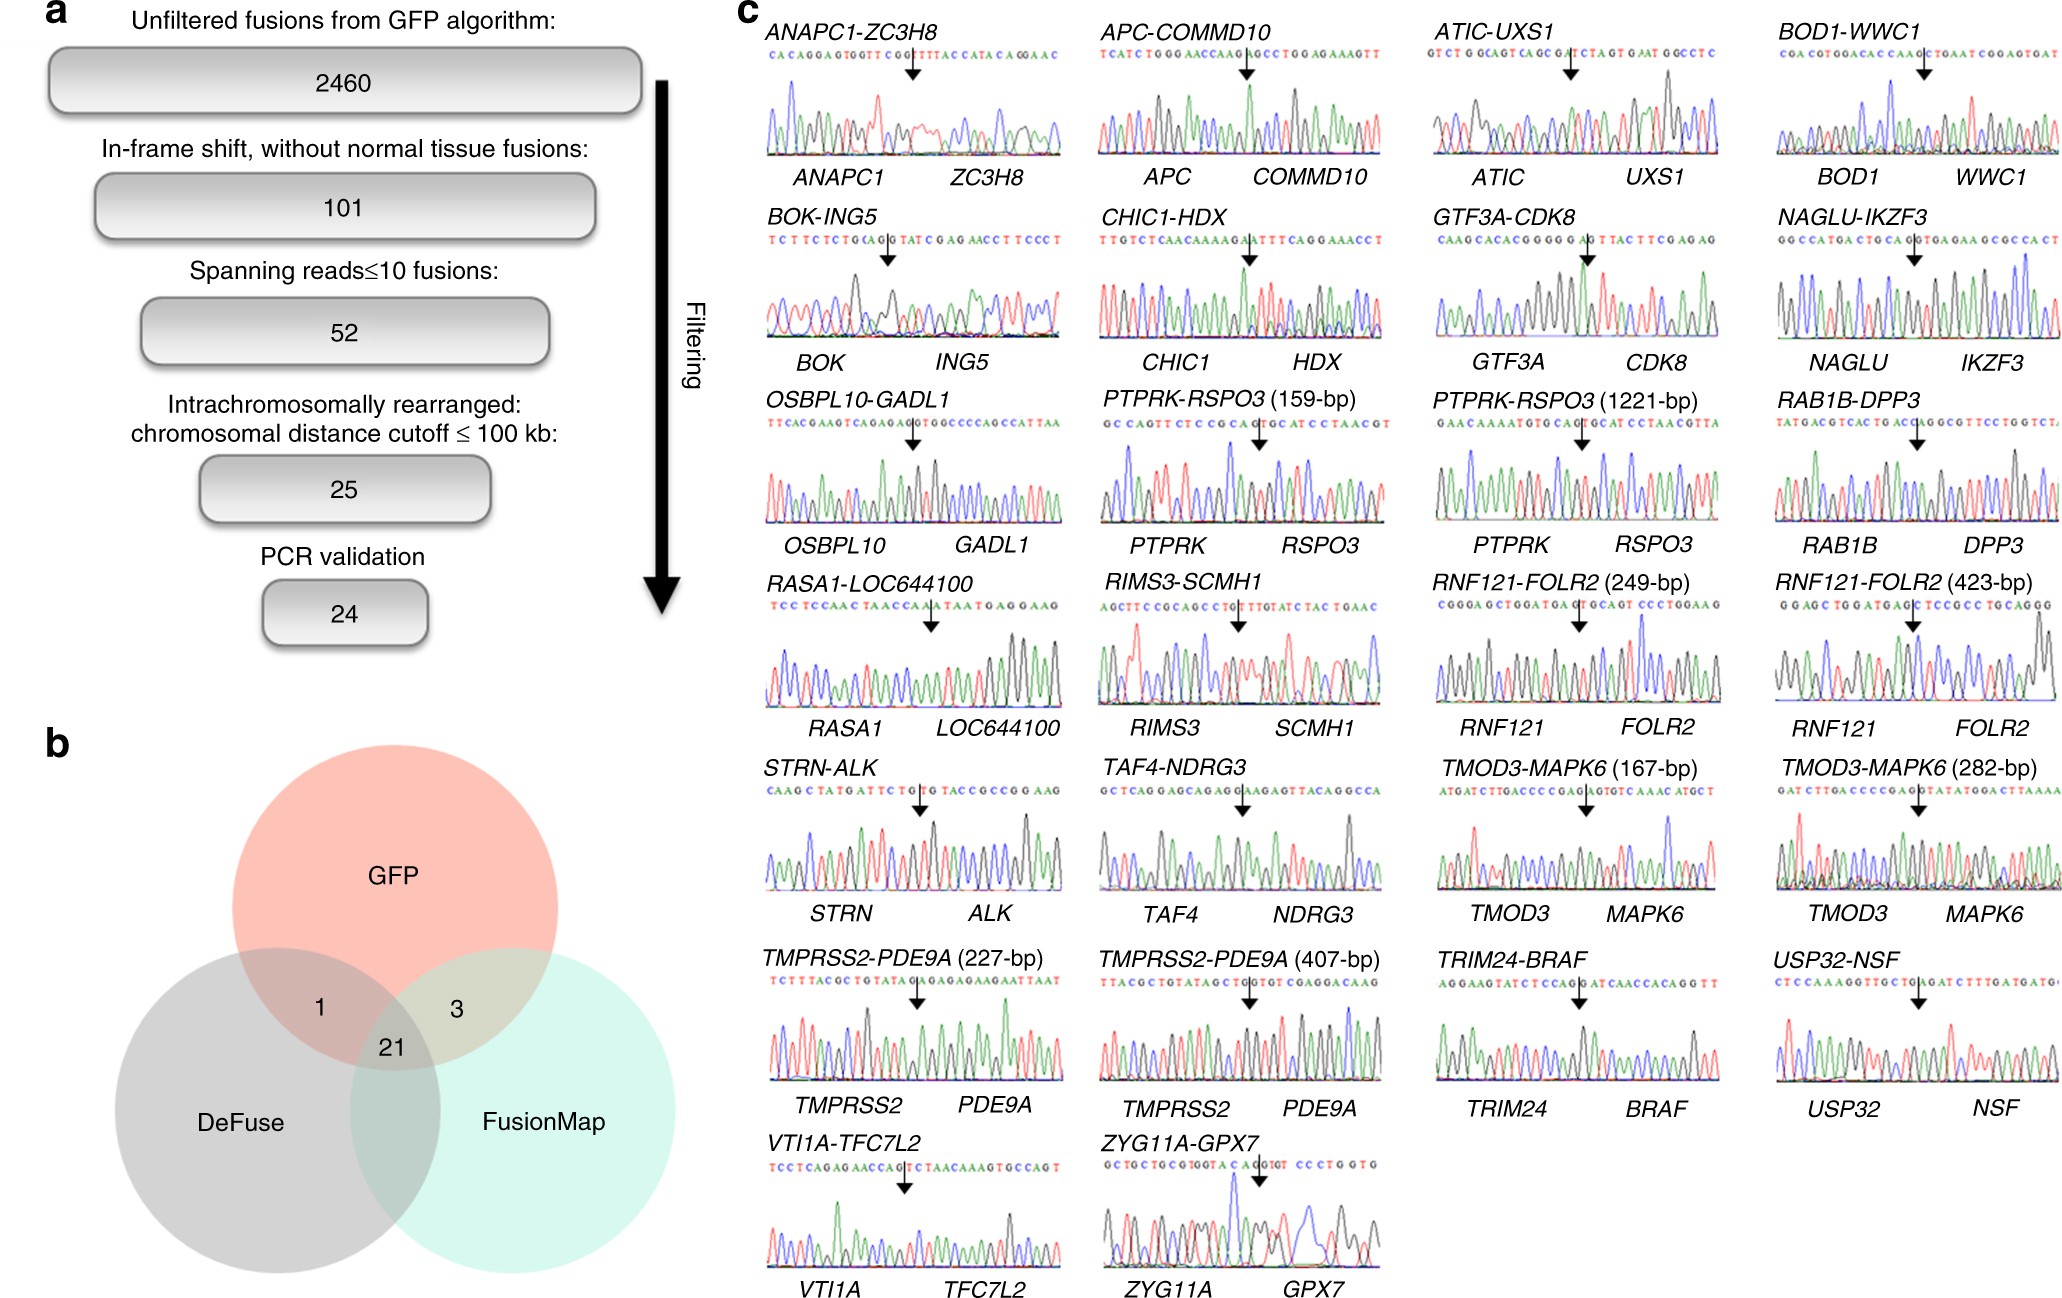 Integrative analysis of oncogenic fusion genes and their functional impact  in colorectal cancer | British Journal of Cancer